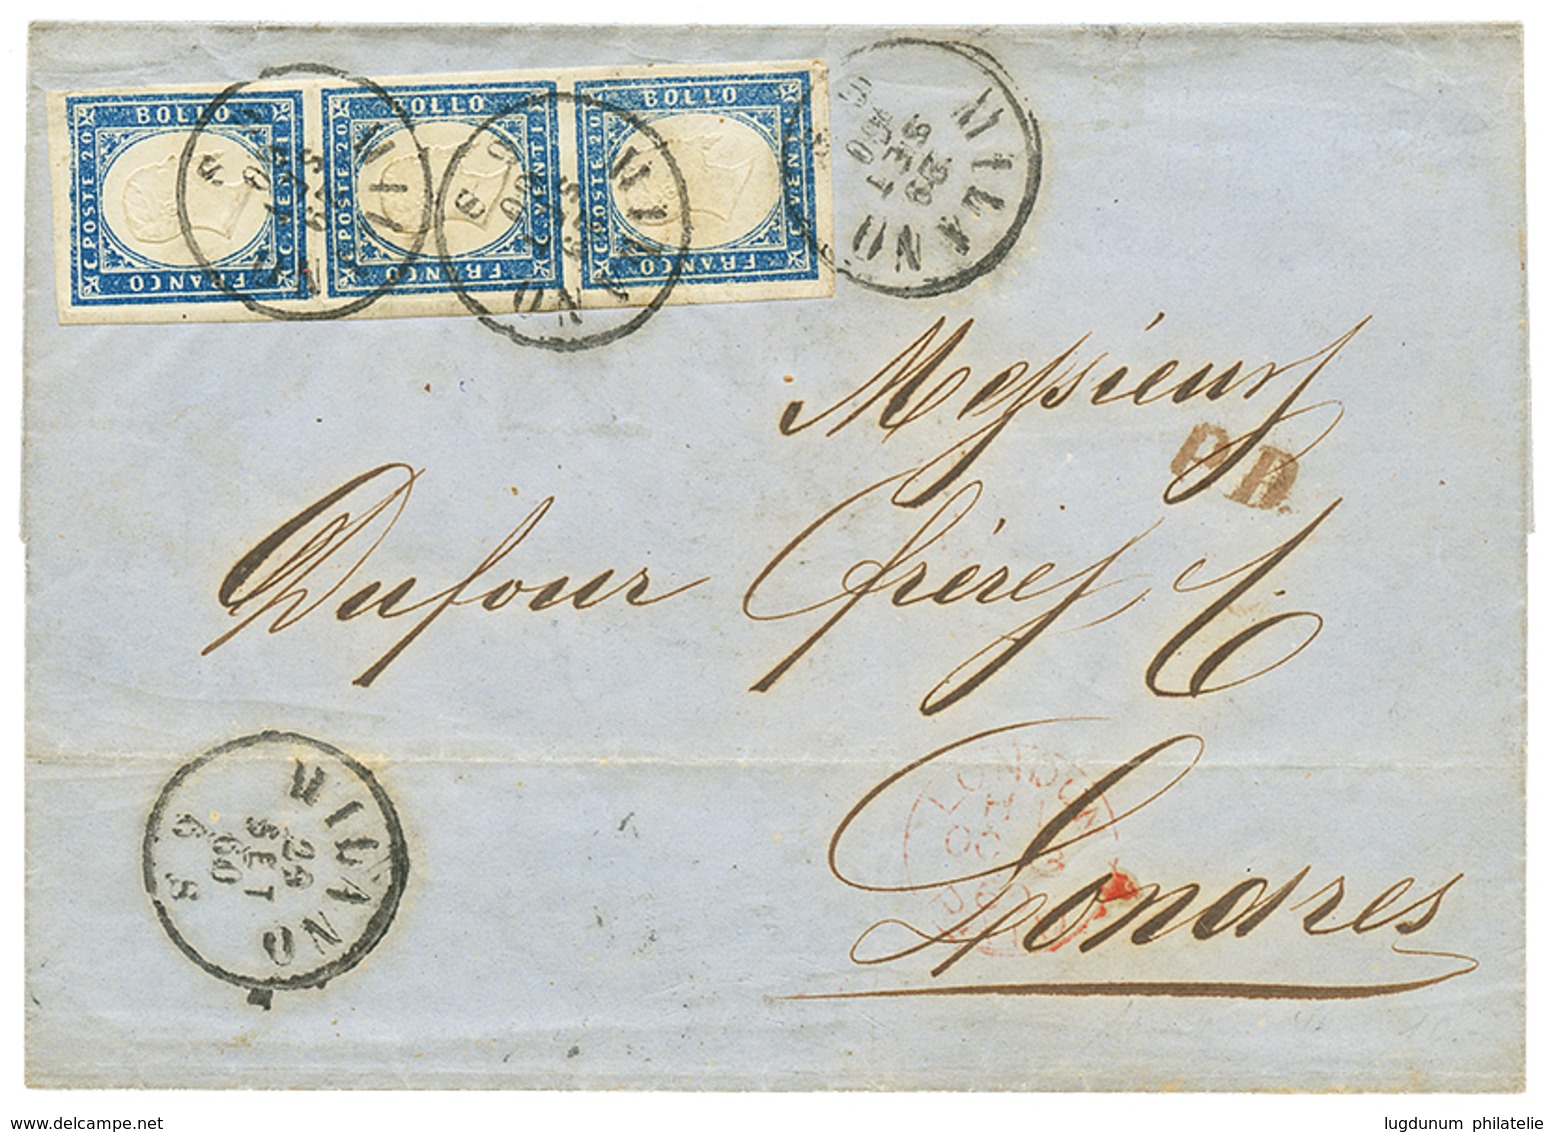 1174 SARDINIA : 1860 20c Strip Of 3 With Large Margins Canc. MILANO On Cover To ENGLAND. Superb. - Unclassified